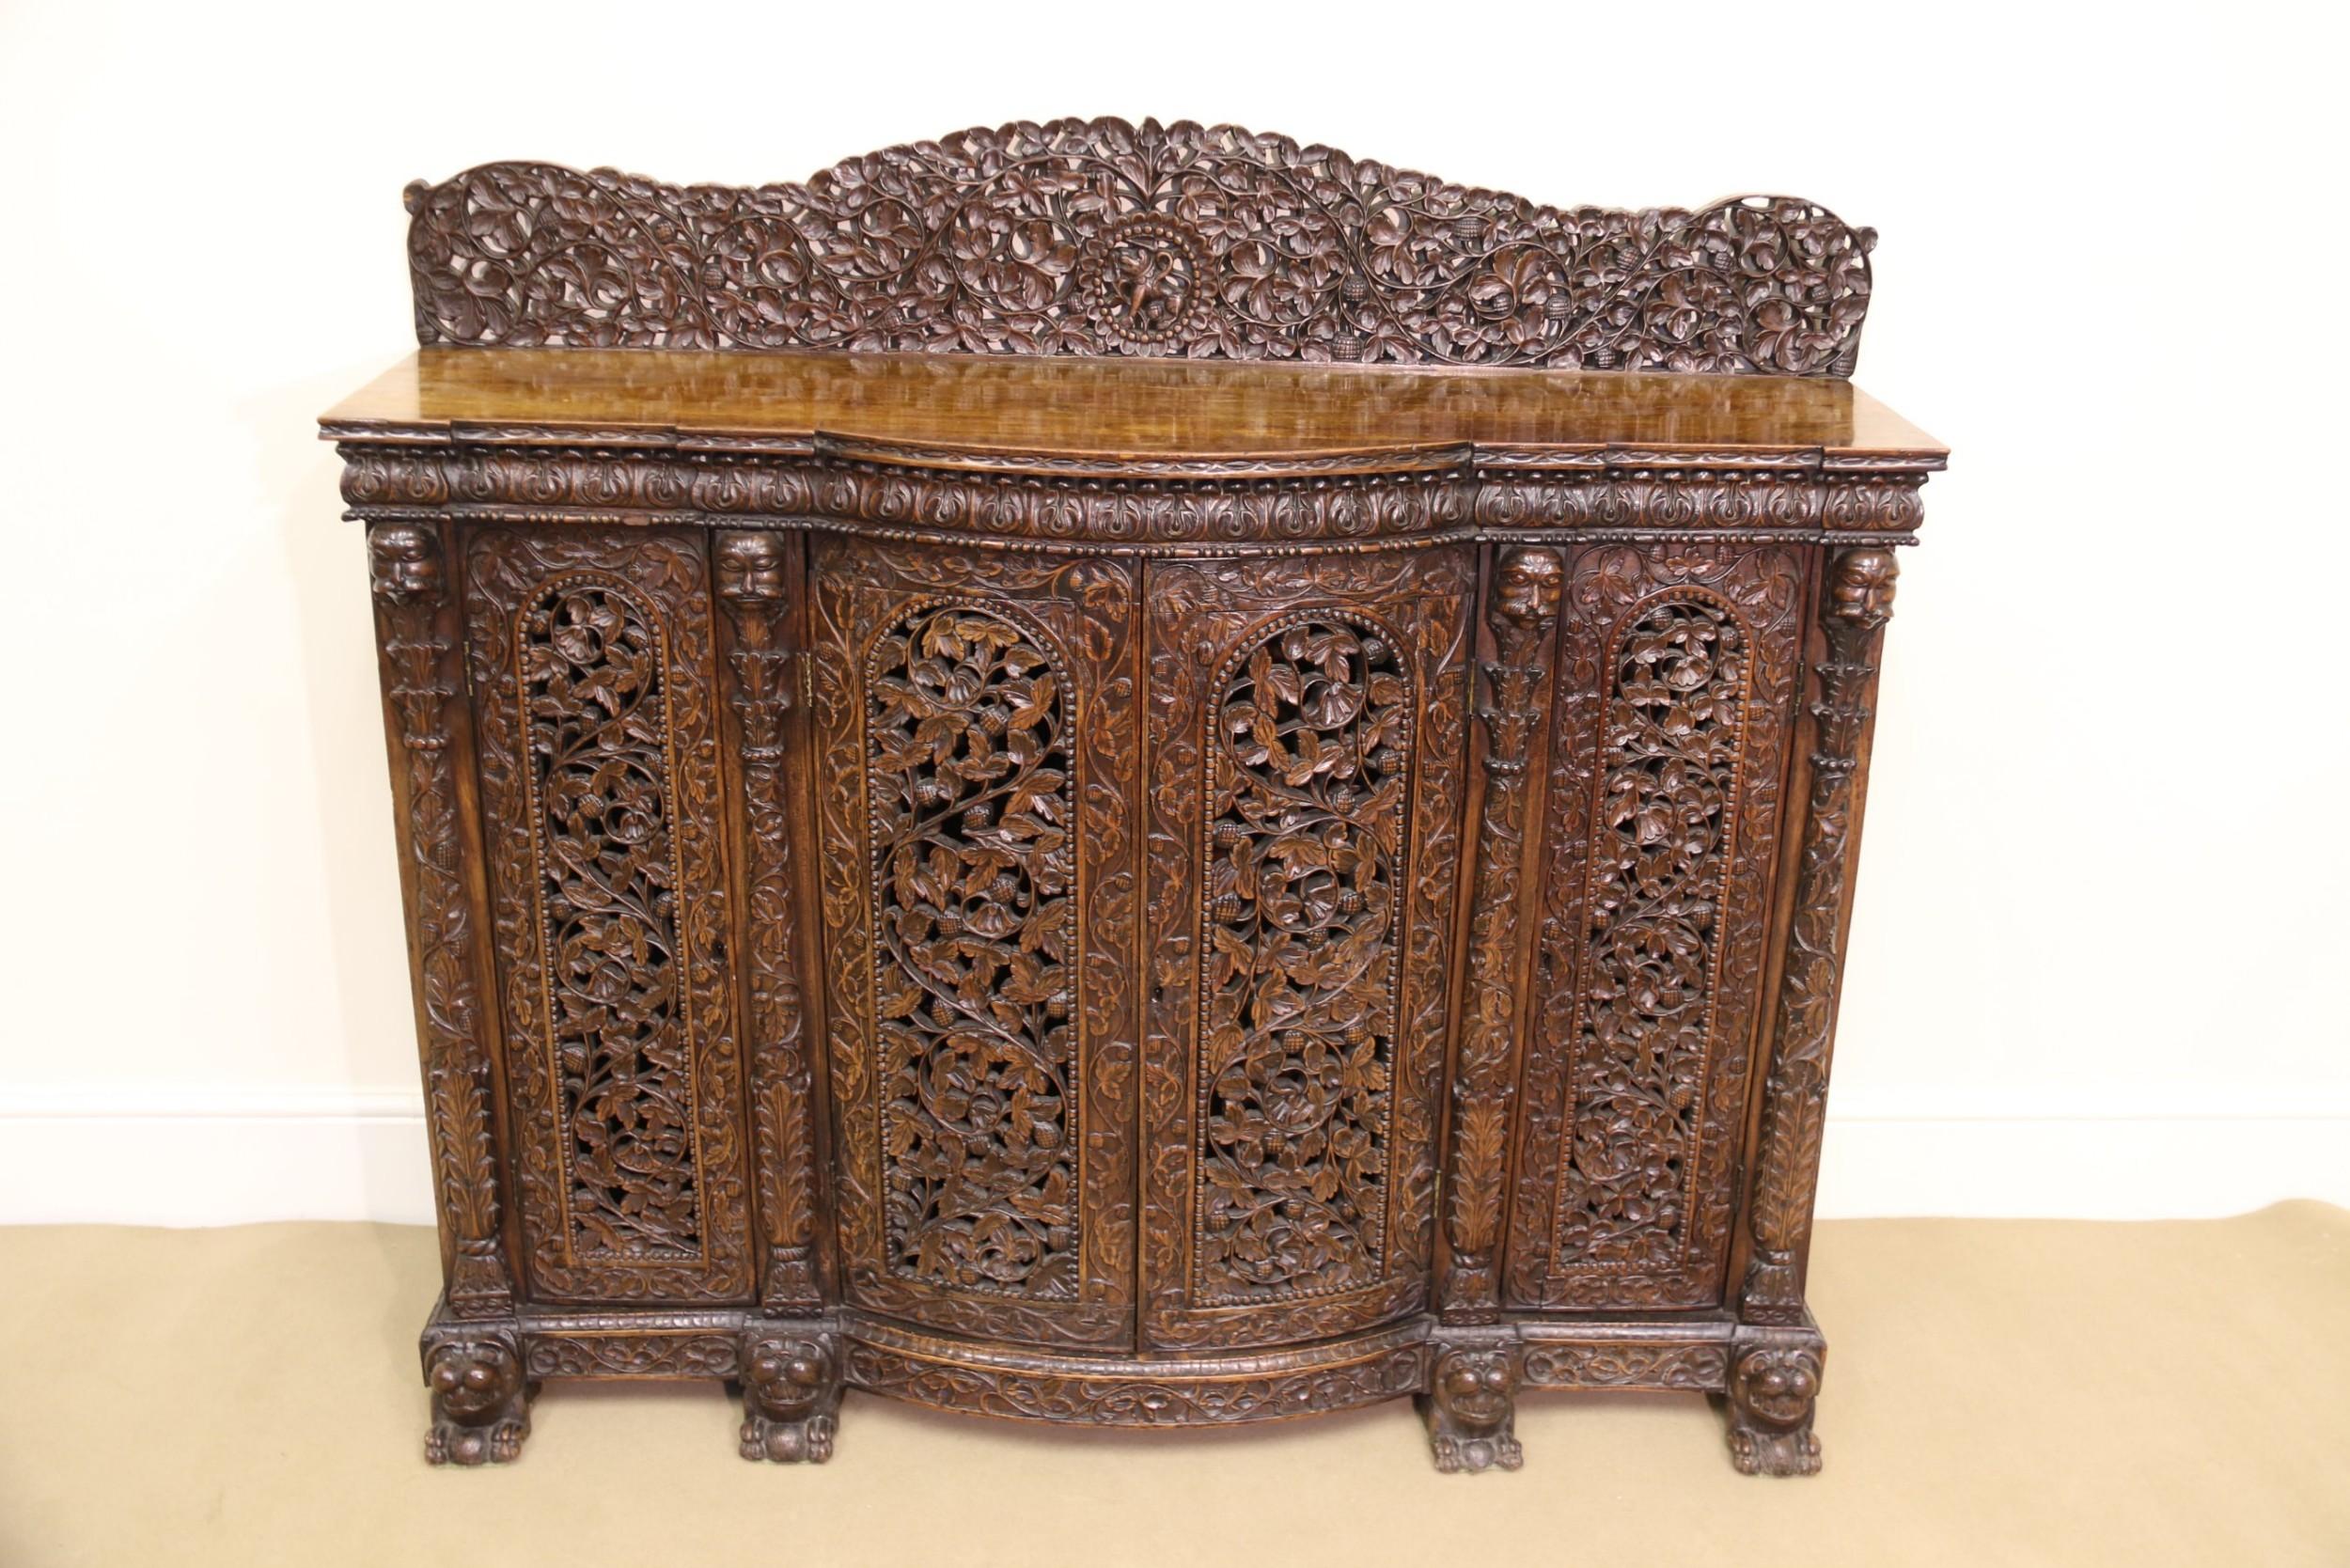 This highly decorative and impressive 19th century Indian carved padauk wood cabinet is profusely carved with fine foliate detail throughout.
The figured top has a raised decorative back panel. Below there is a shaped frieze with acanthus leaf